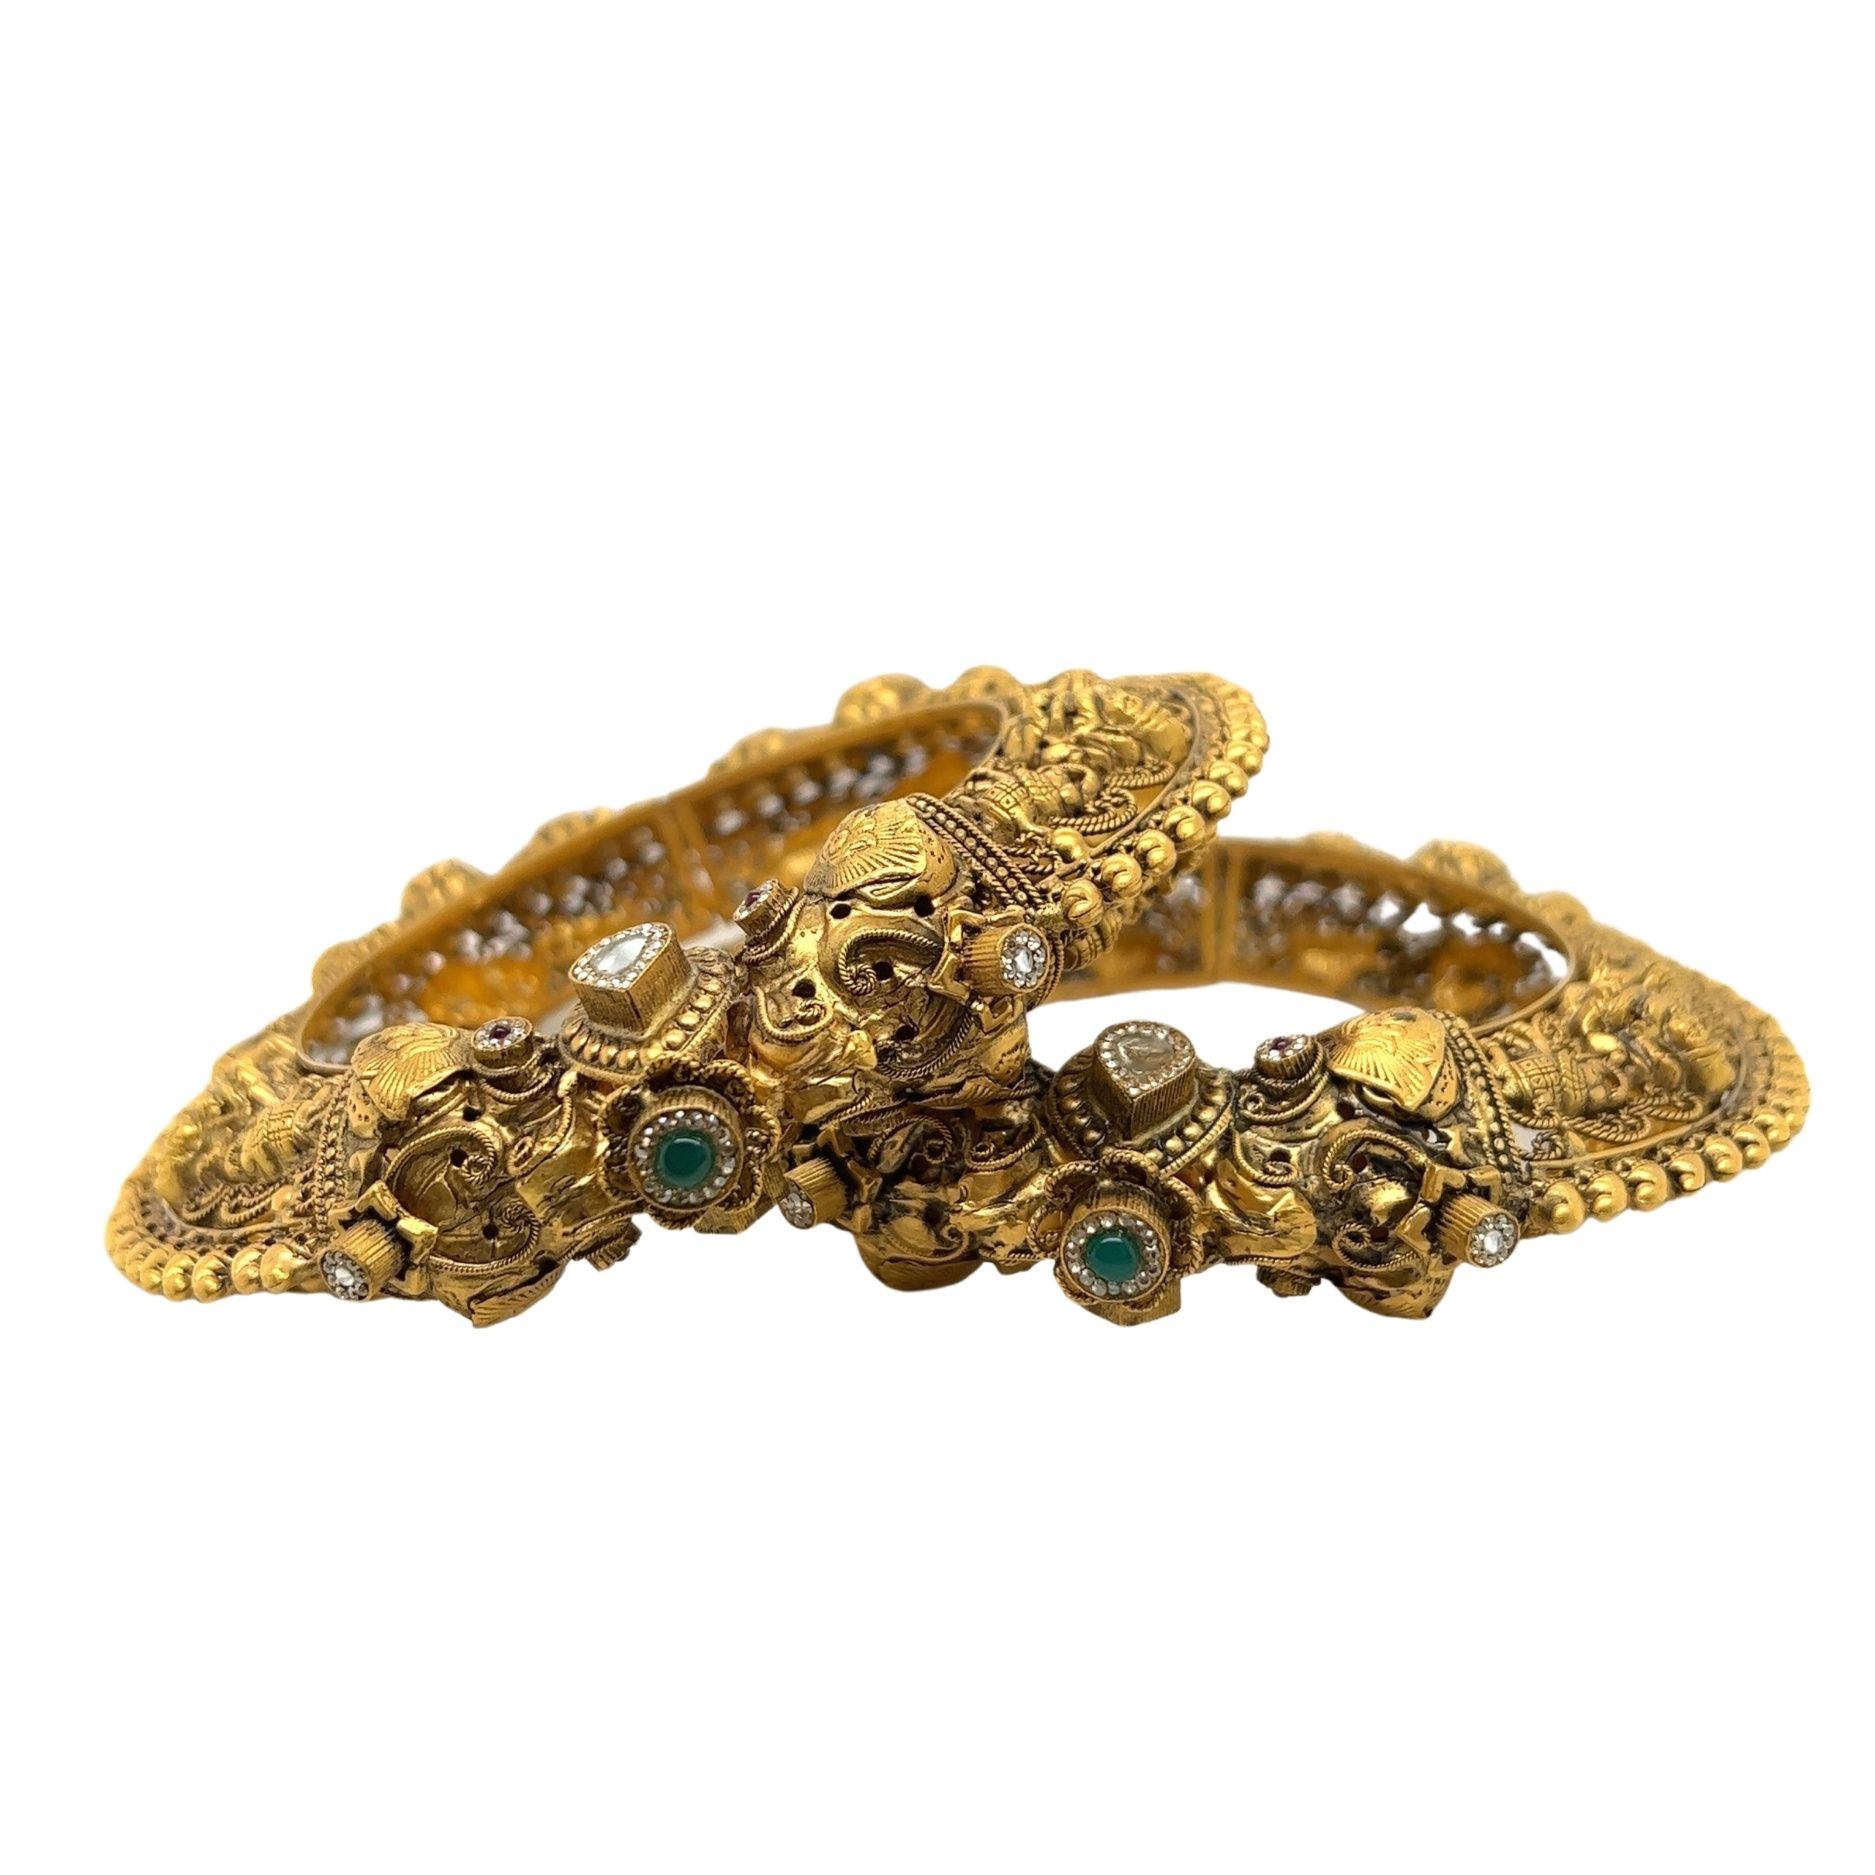 Temple　a　Gold　Treasures:　Fit　A　Majestic　Tallajewellers　22KT　Kada　for　Queen